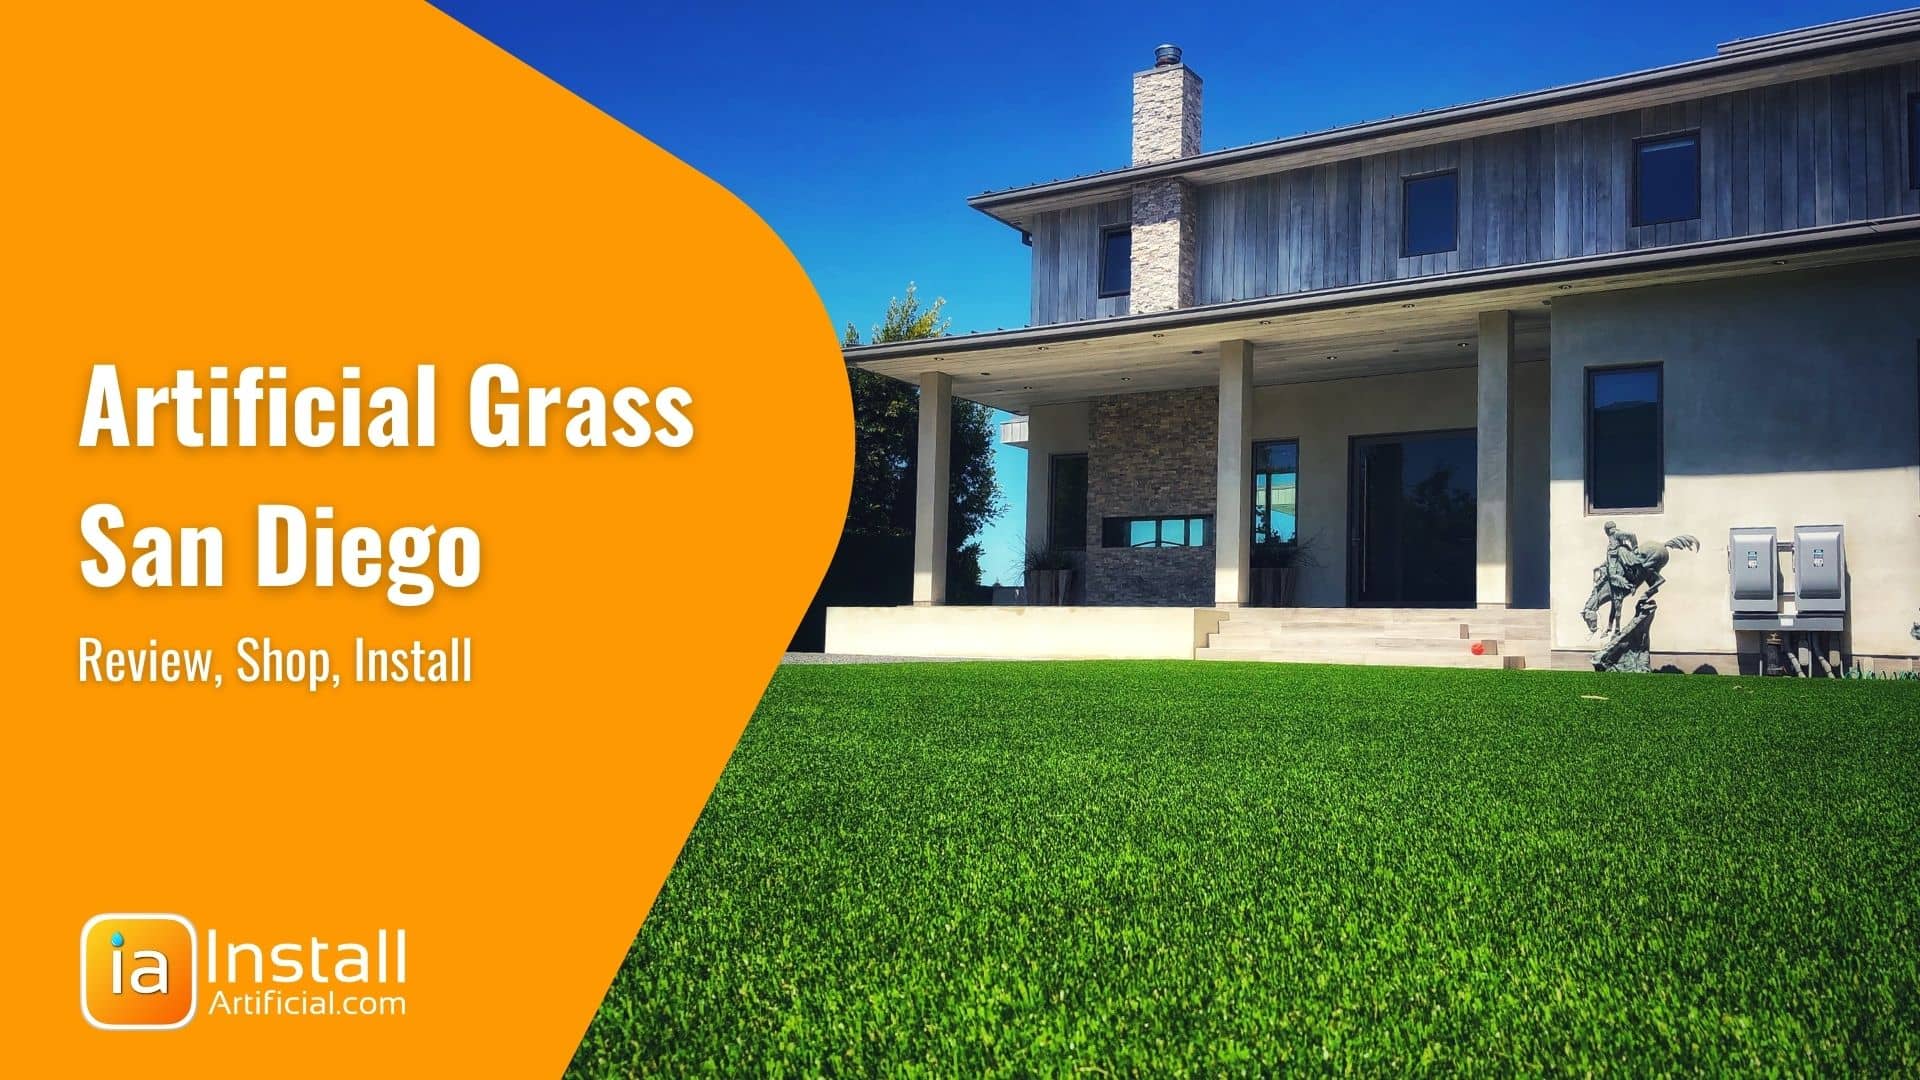 What's the Price of Artificial Grass in San Diego?